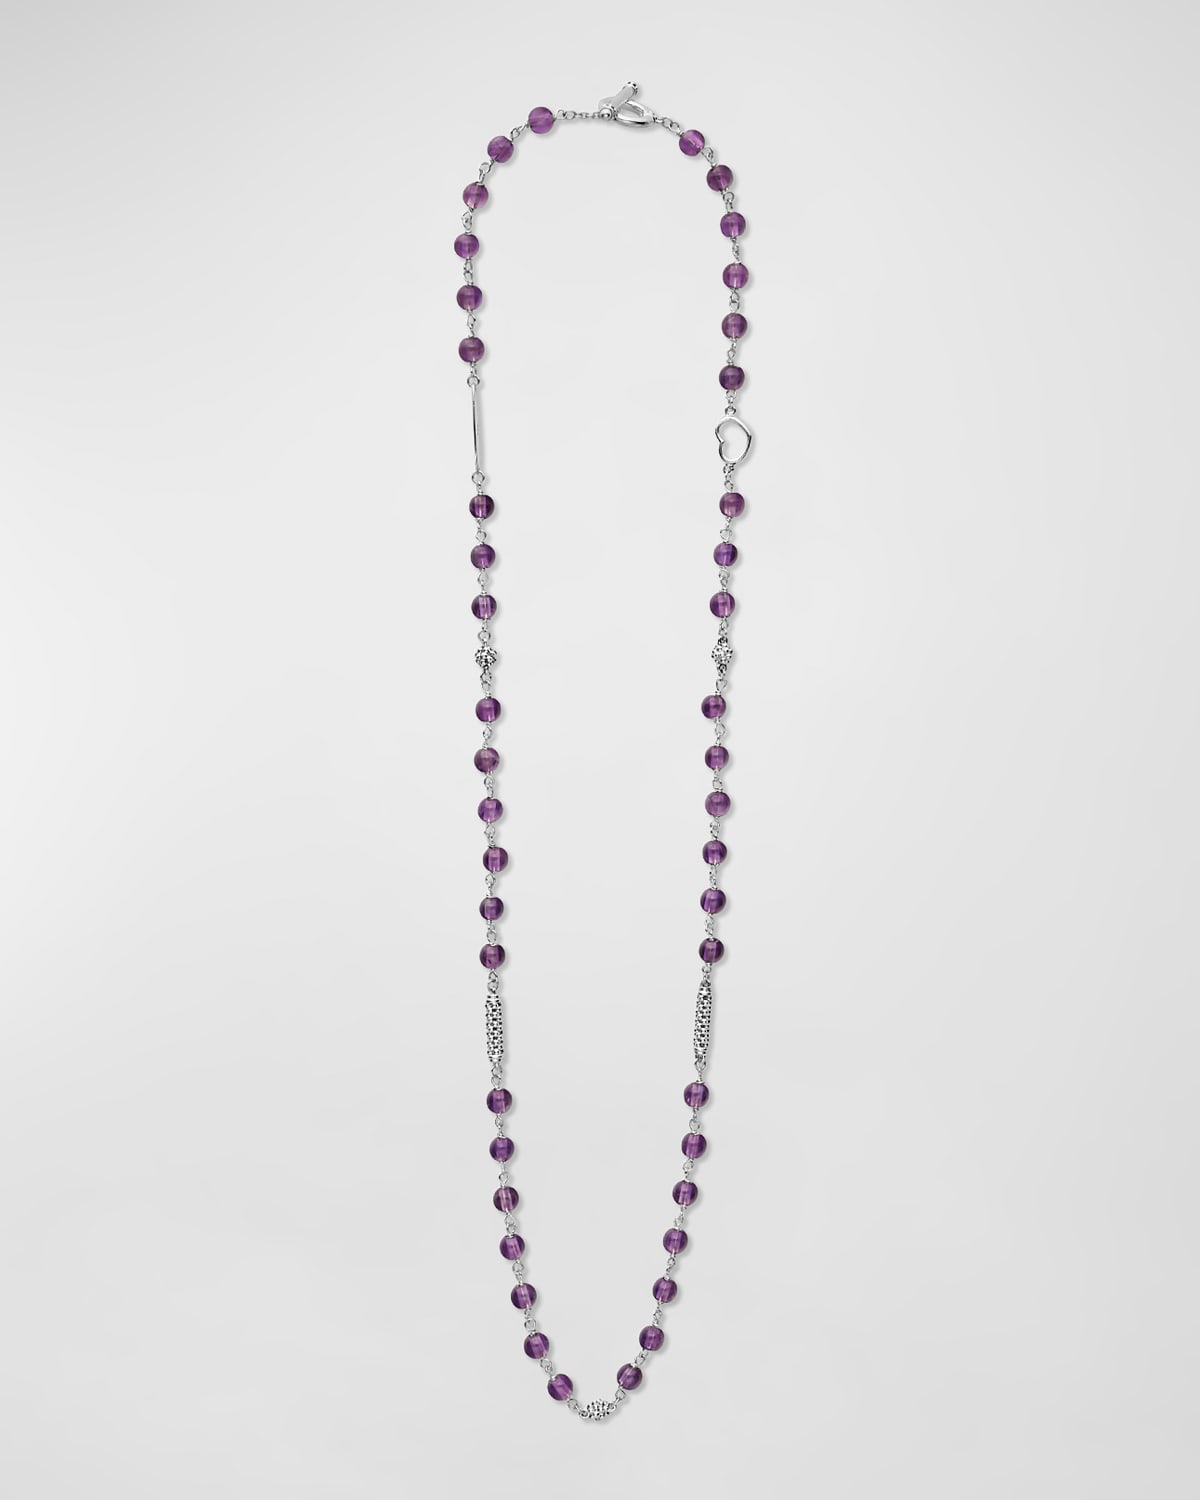 LAGOS CAVIAR ICON AMETHYST 5-STATION STERLING SILVER NECKLACE